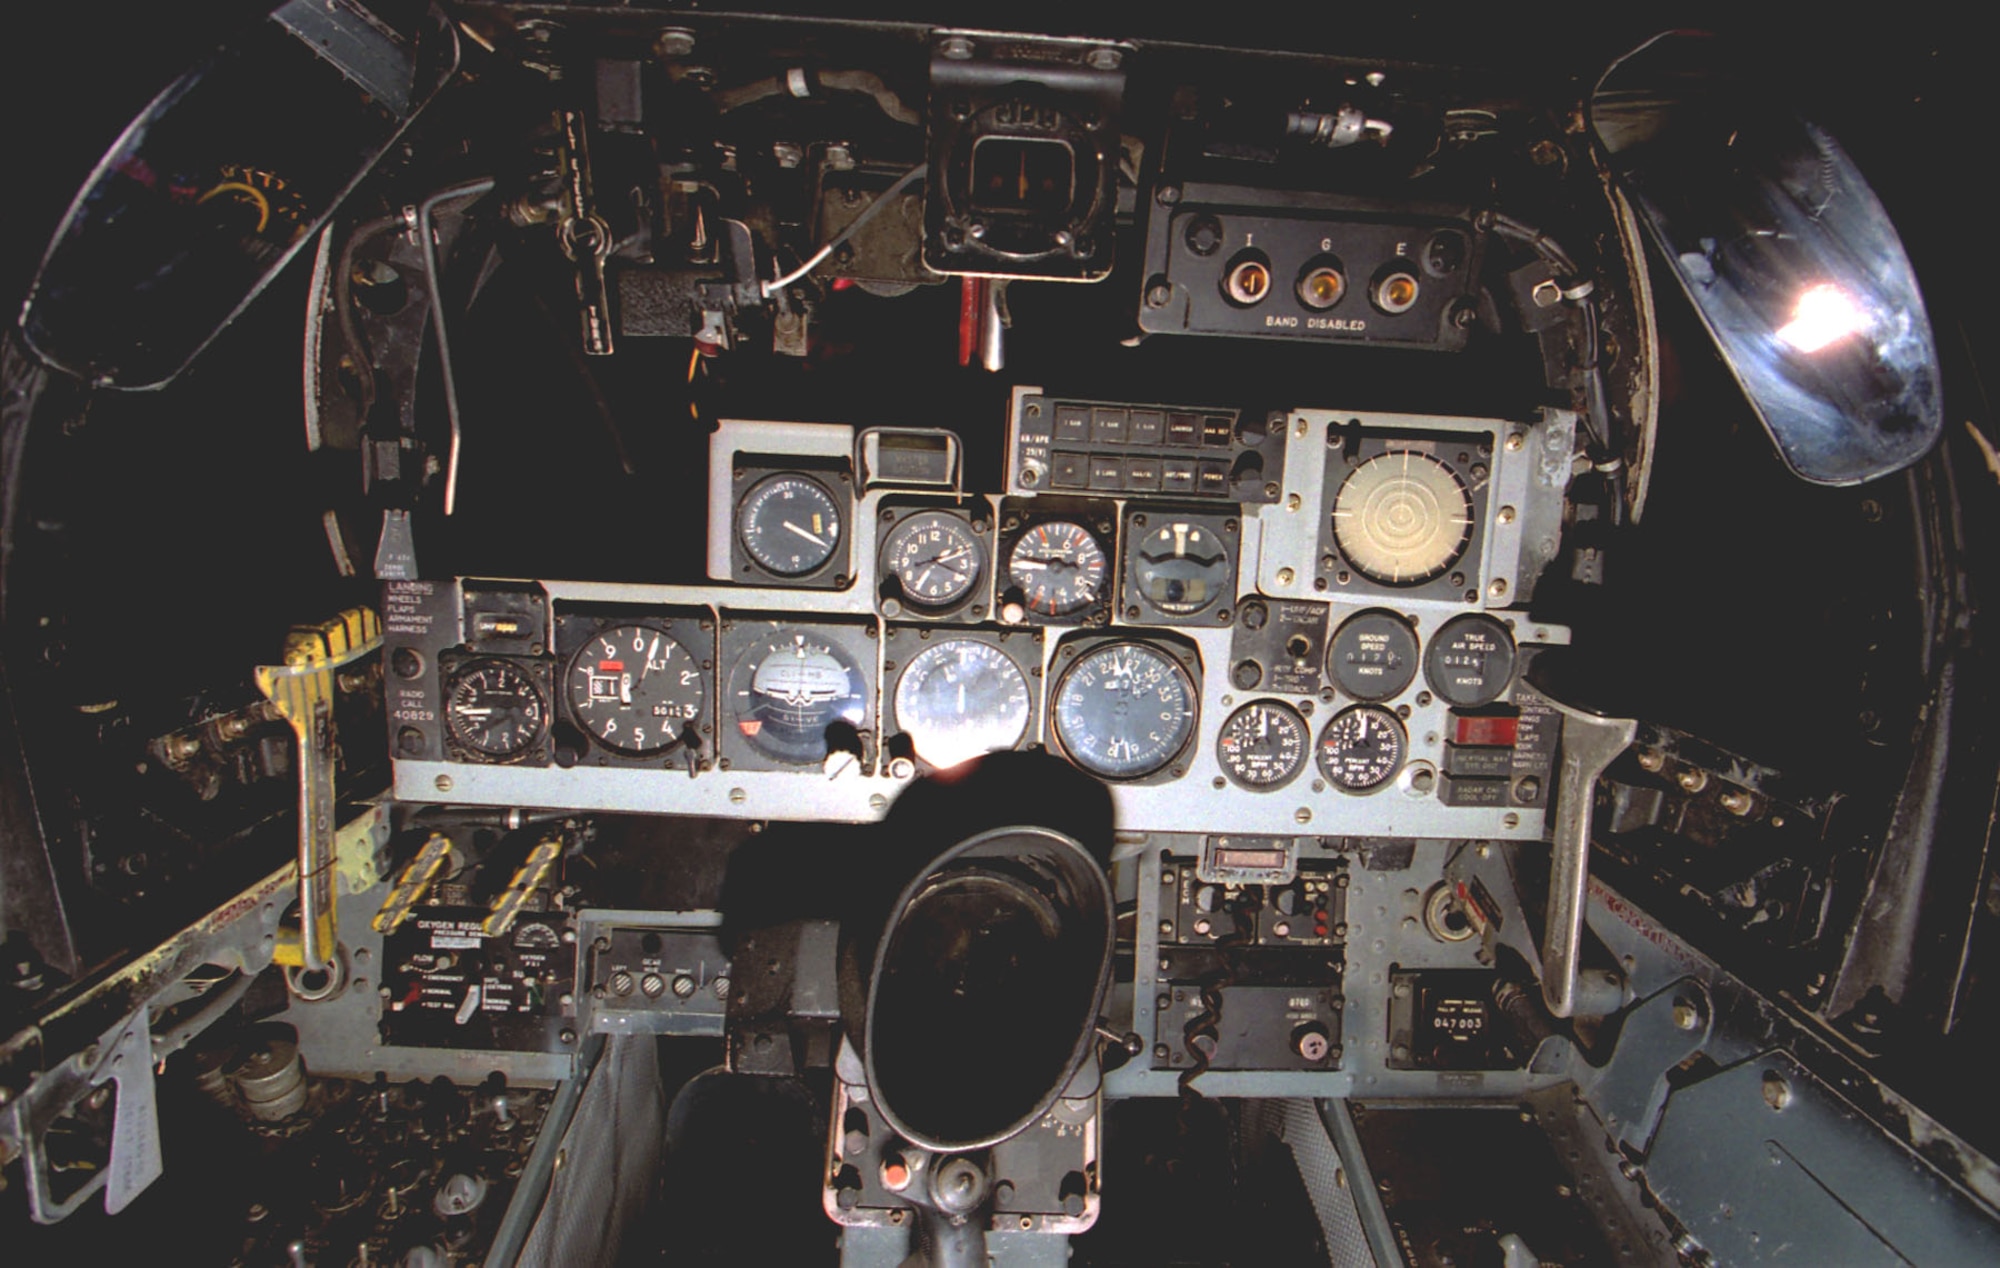 DAYTON, Ohio -- McDonnell Douglas F-4C cockpit at the National Museum of the United States Air Force. (U.S. Air Force photo)